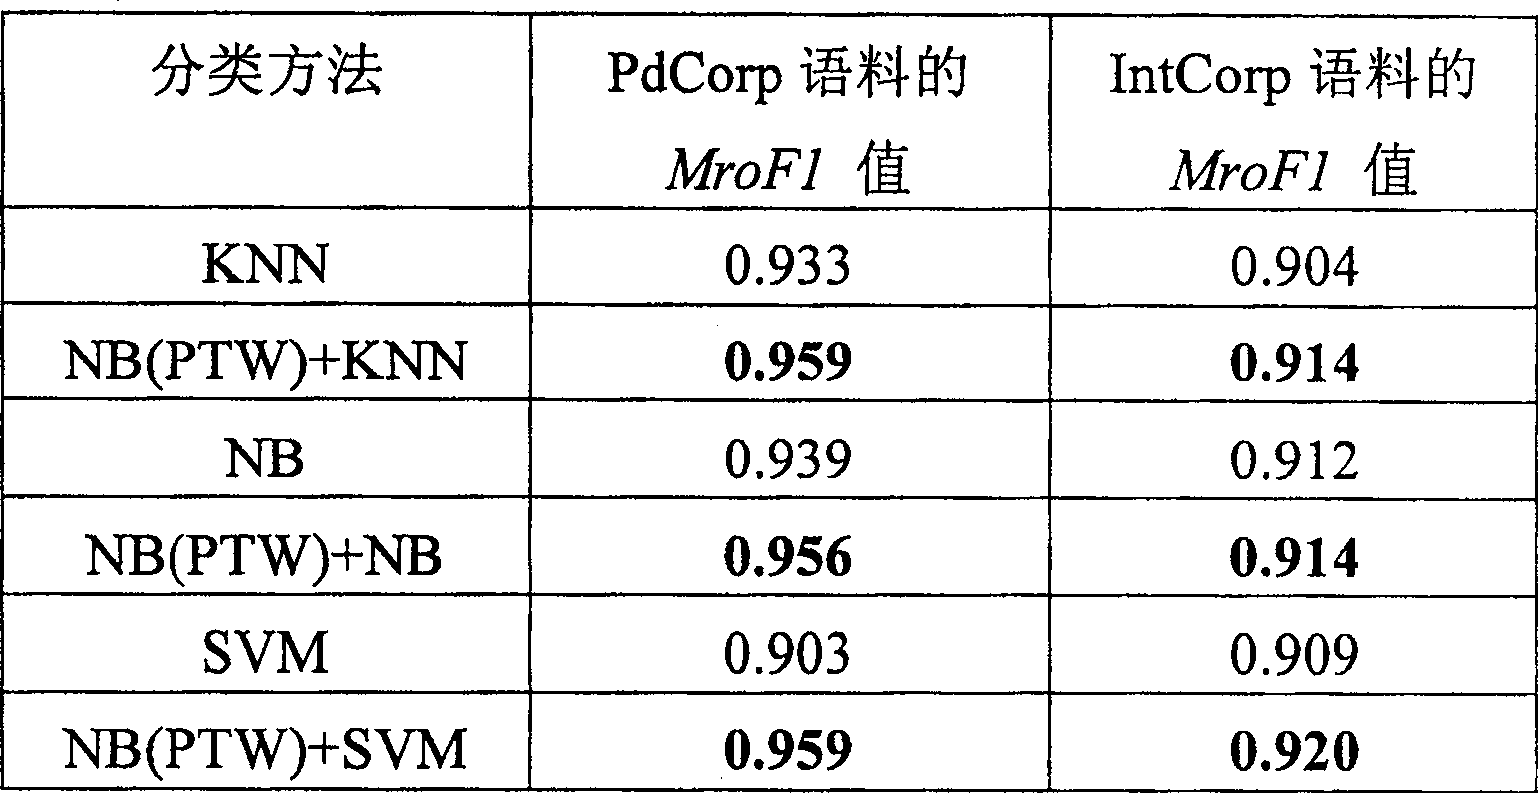 Two-stage combined file classification method based on probability subject